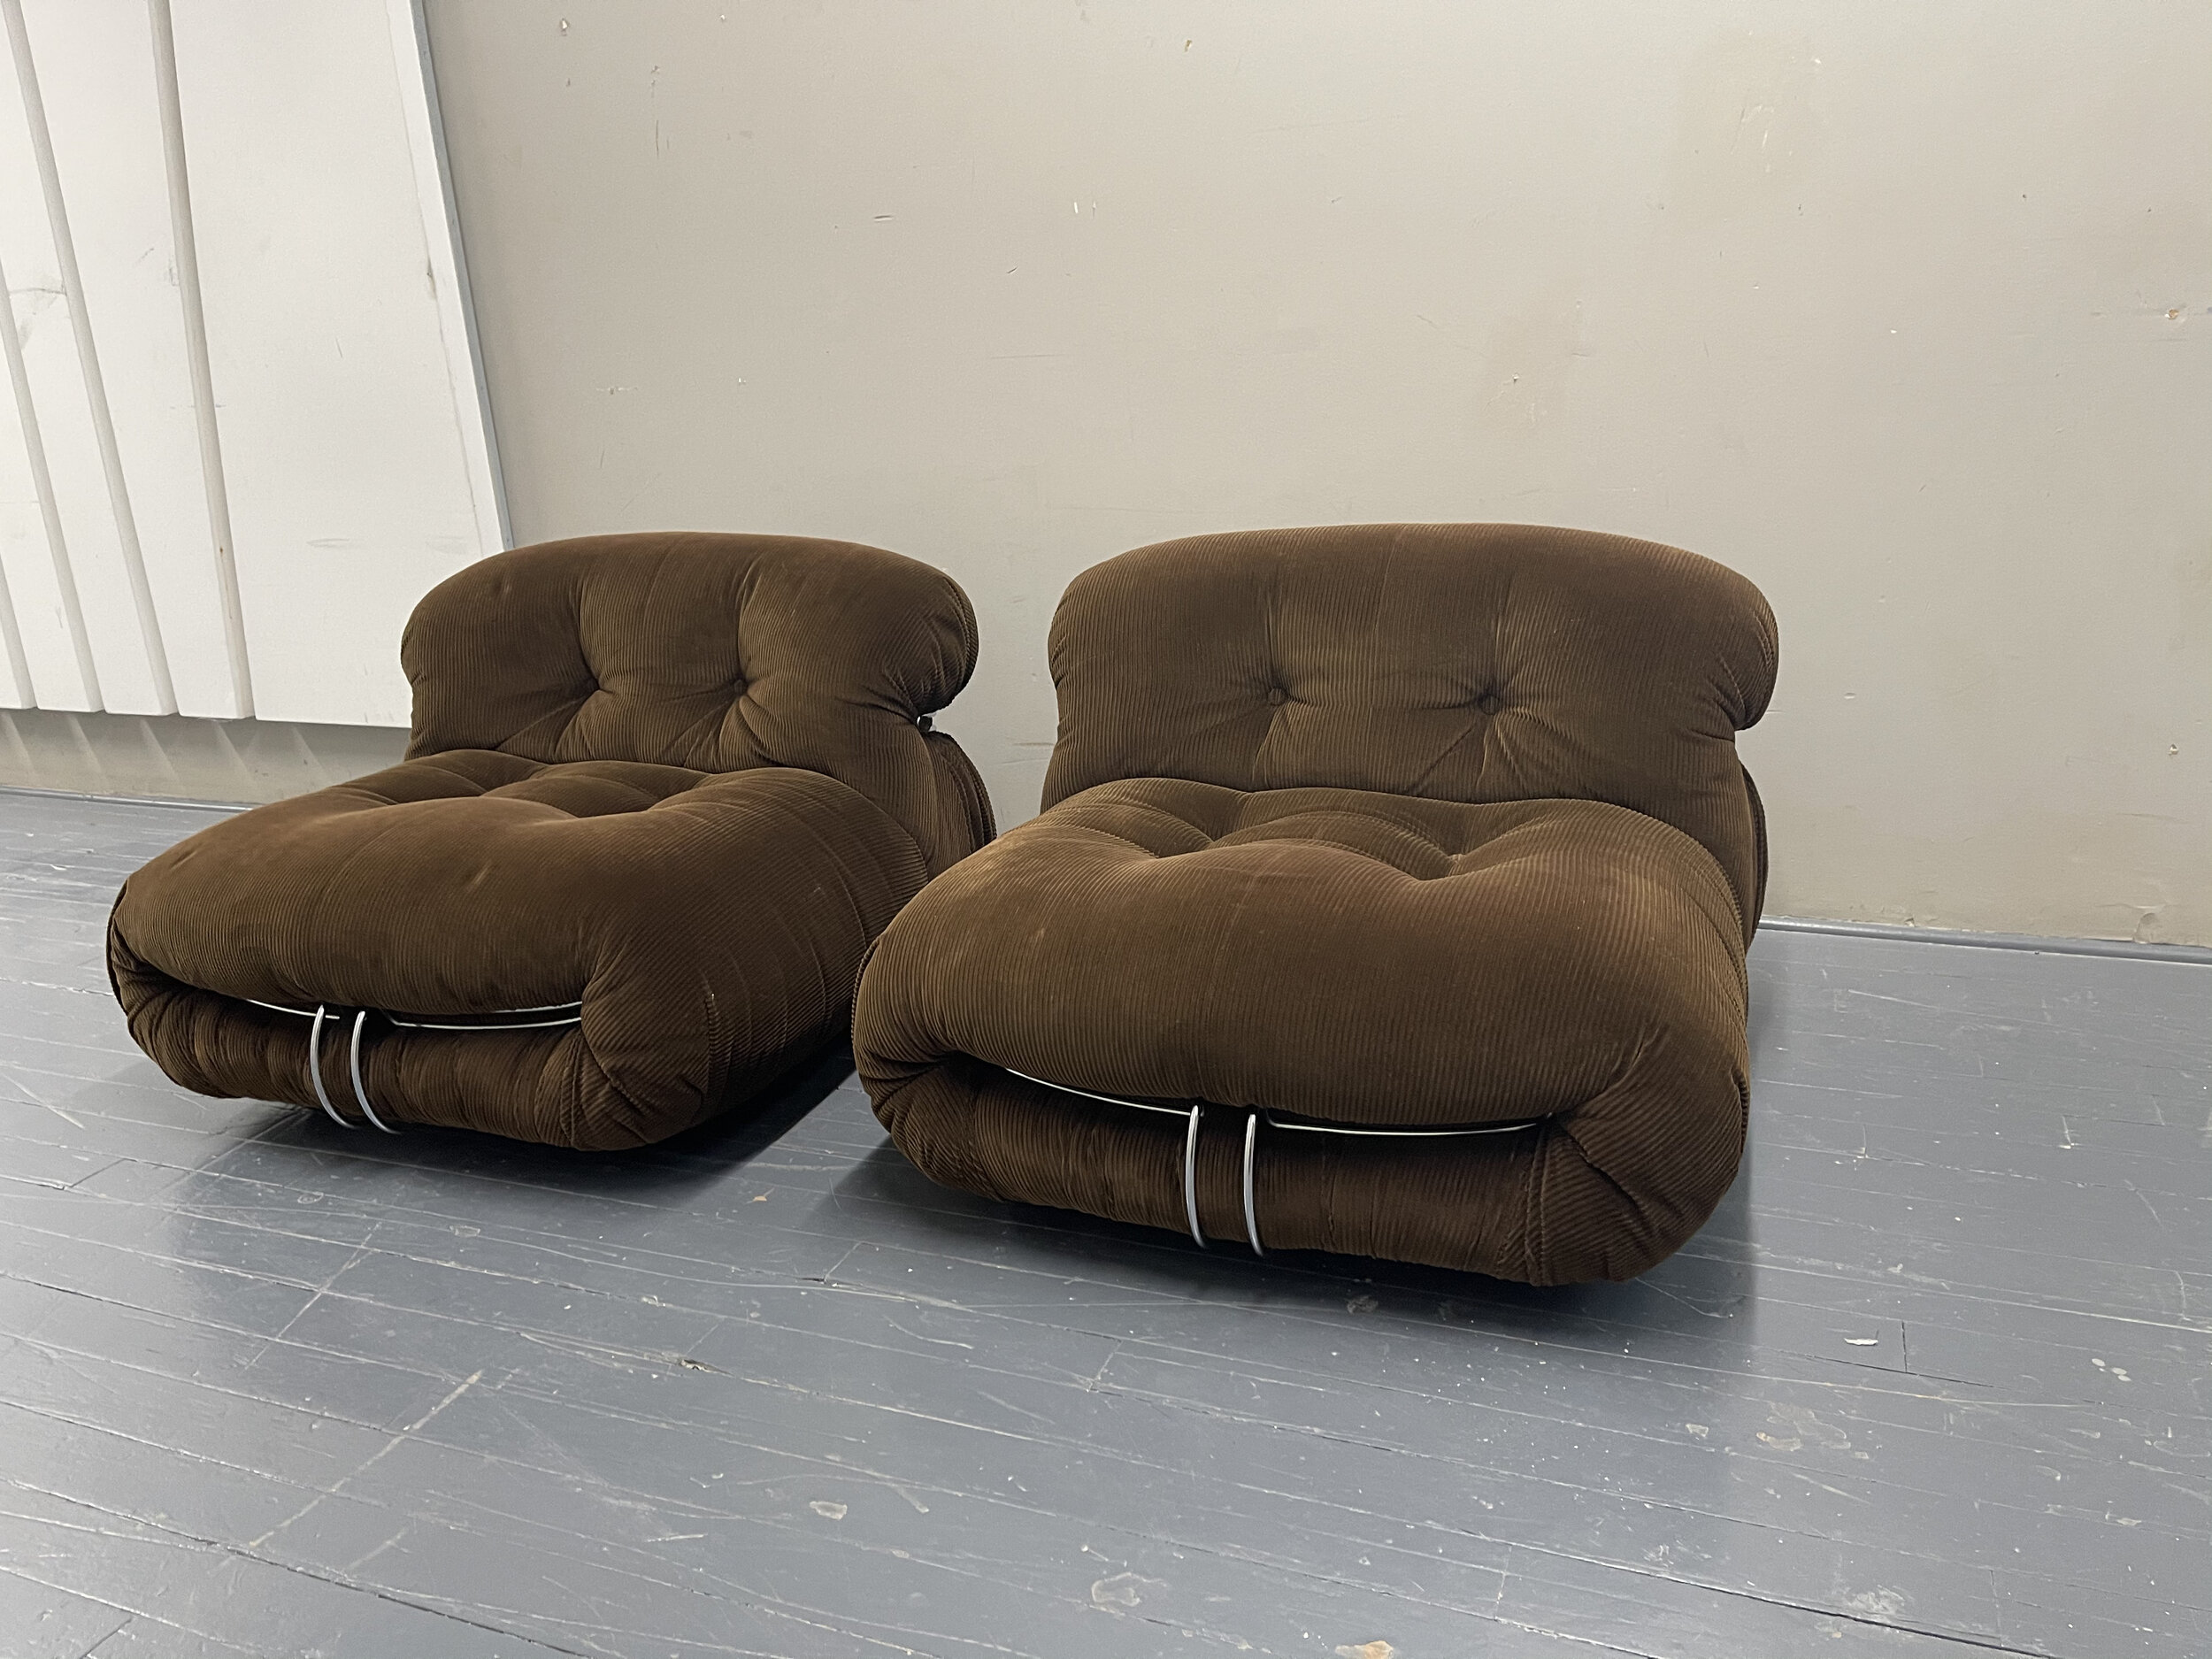 Italian Vintage Chairs | Vintage Soriana Chairs by Cassina Brown Fabric - frontal view image